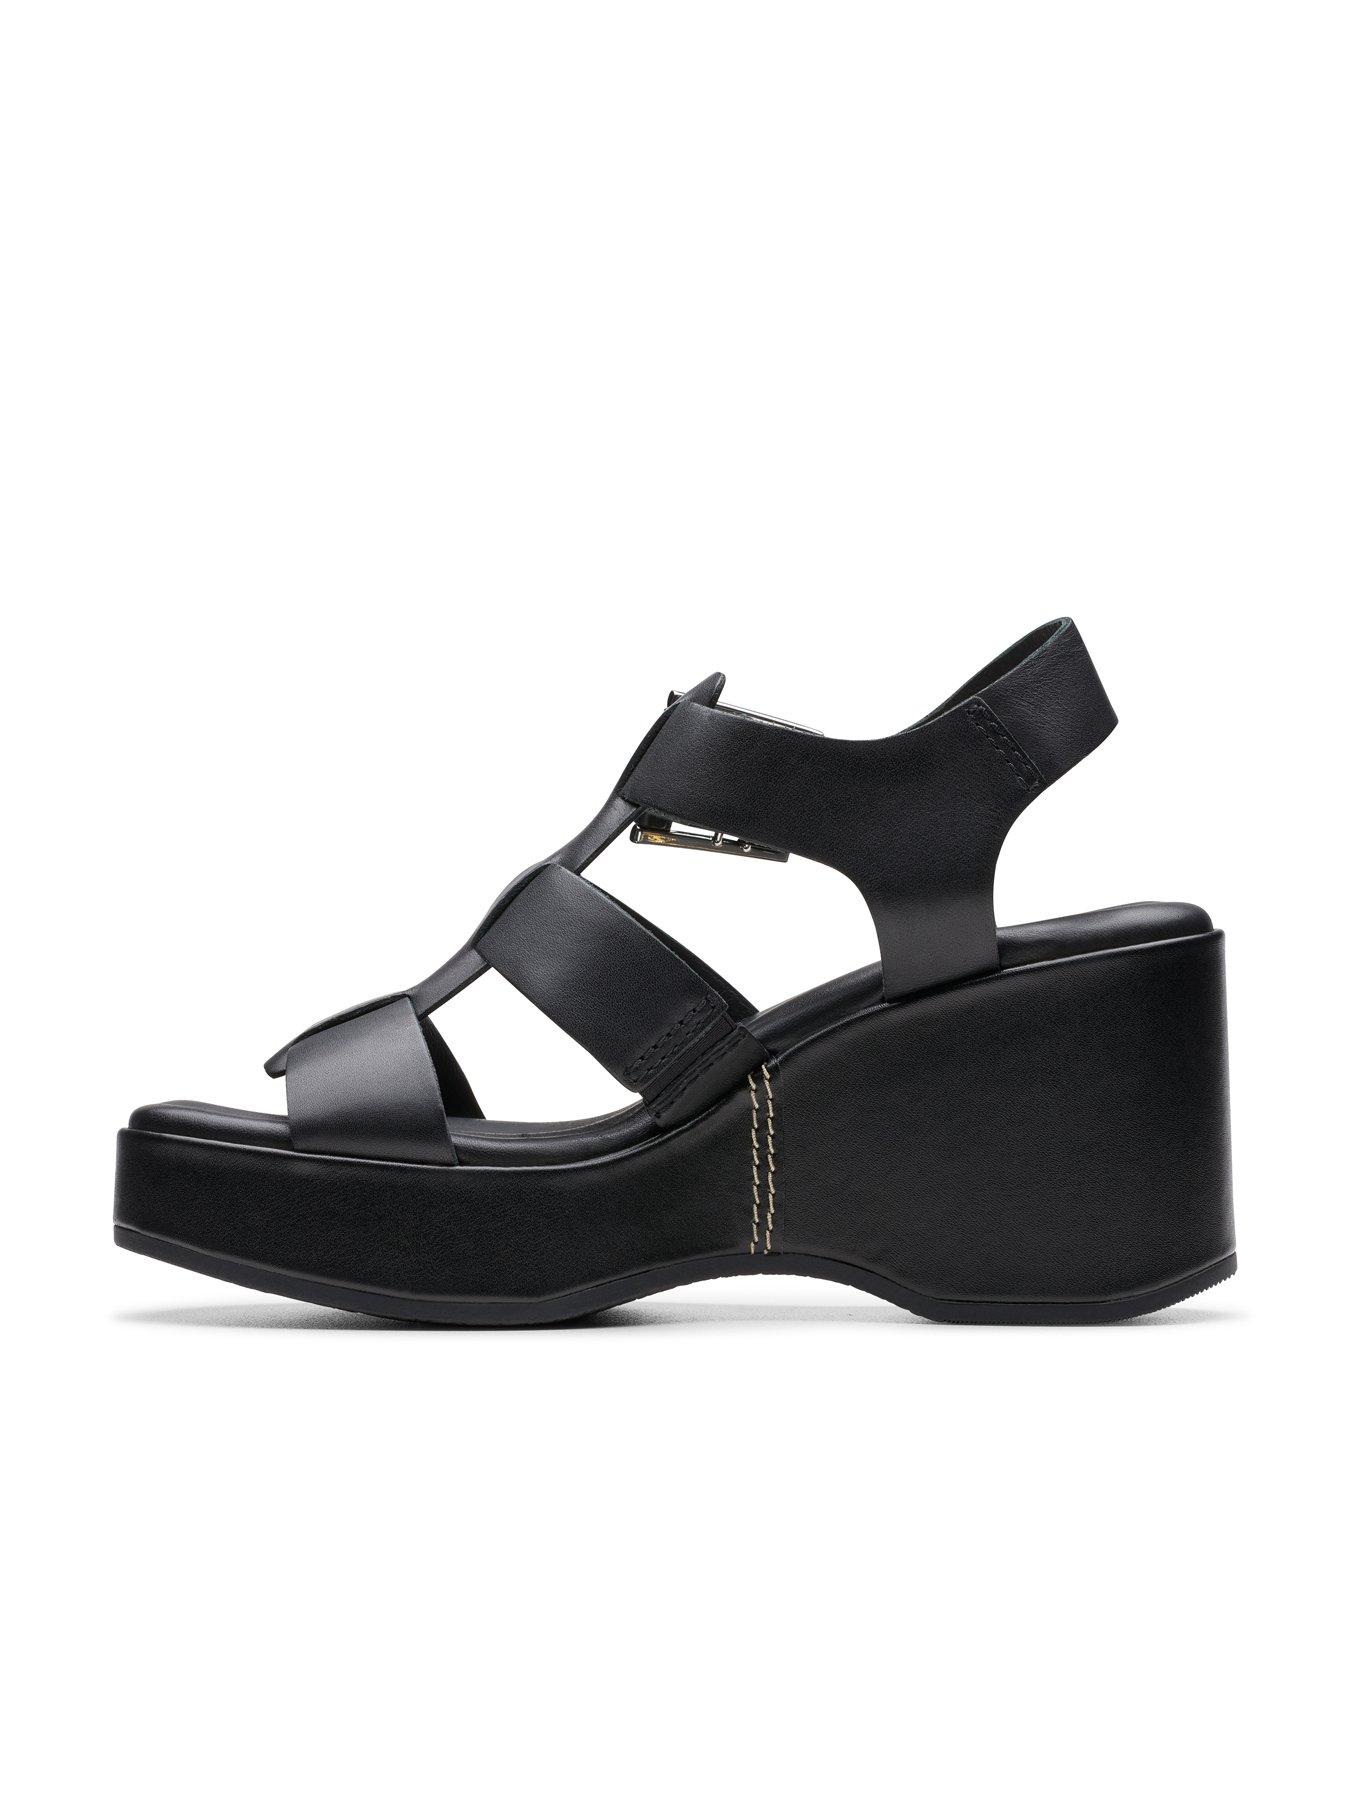 Clarks Manon Cove Leather Chunky Wedge Sandals - Black | Very.co.uk